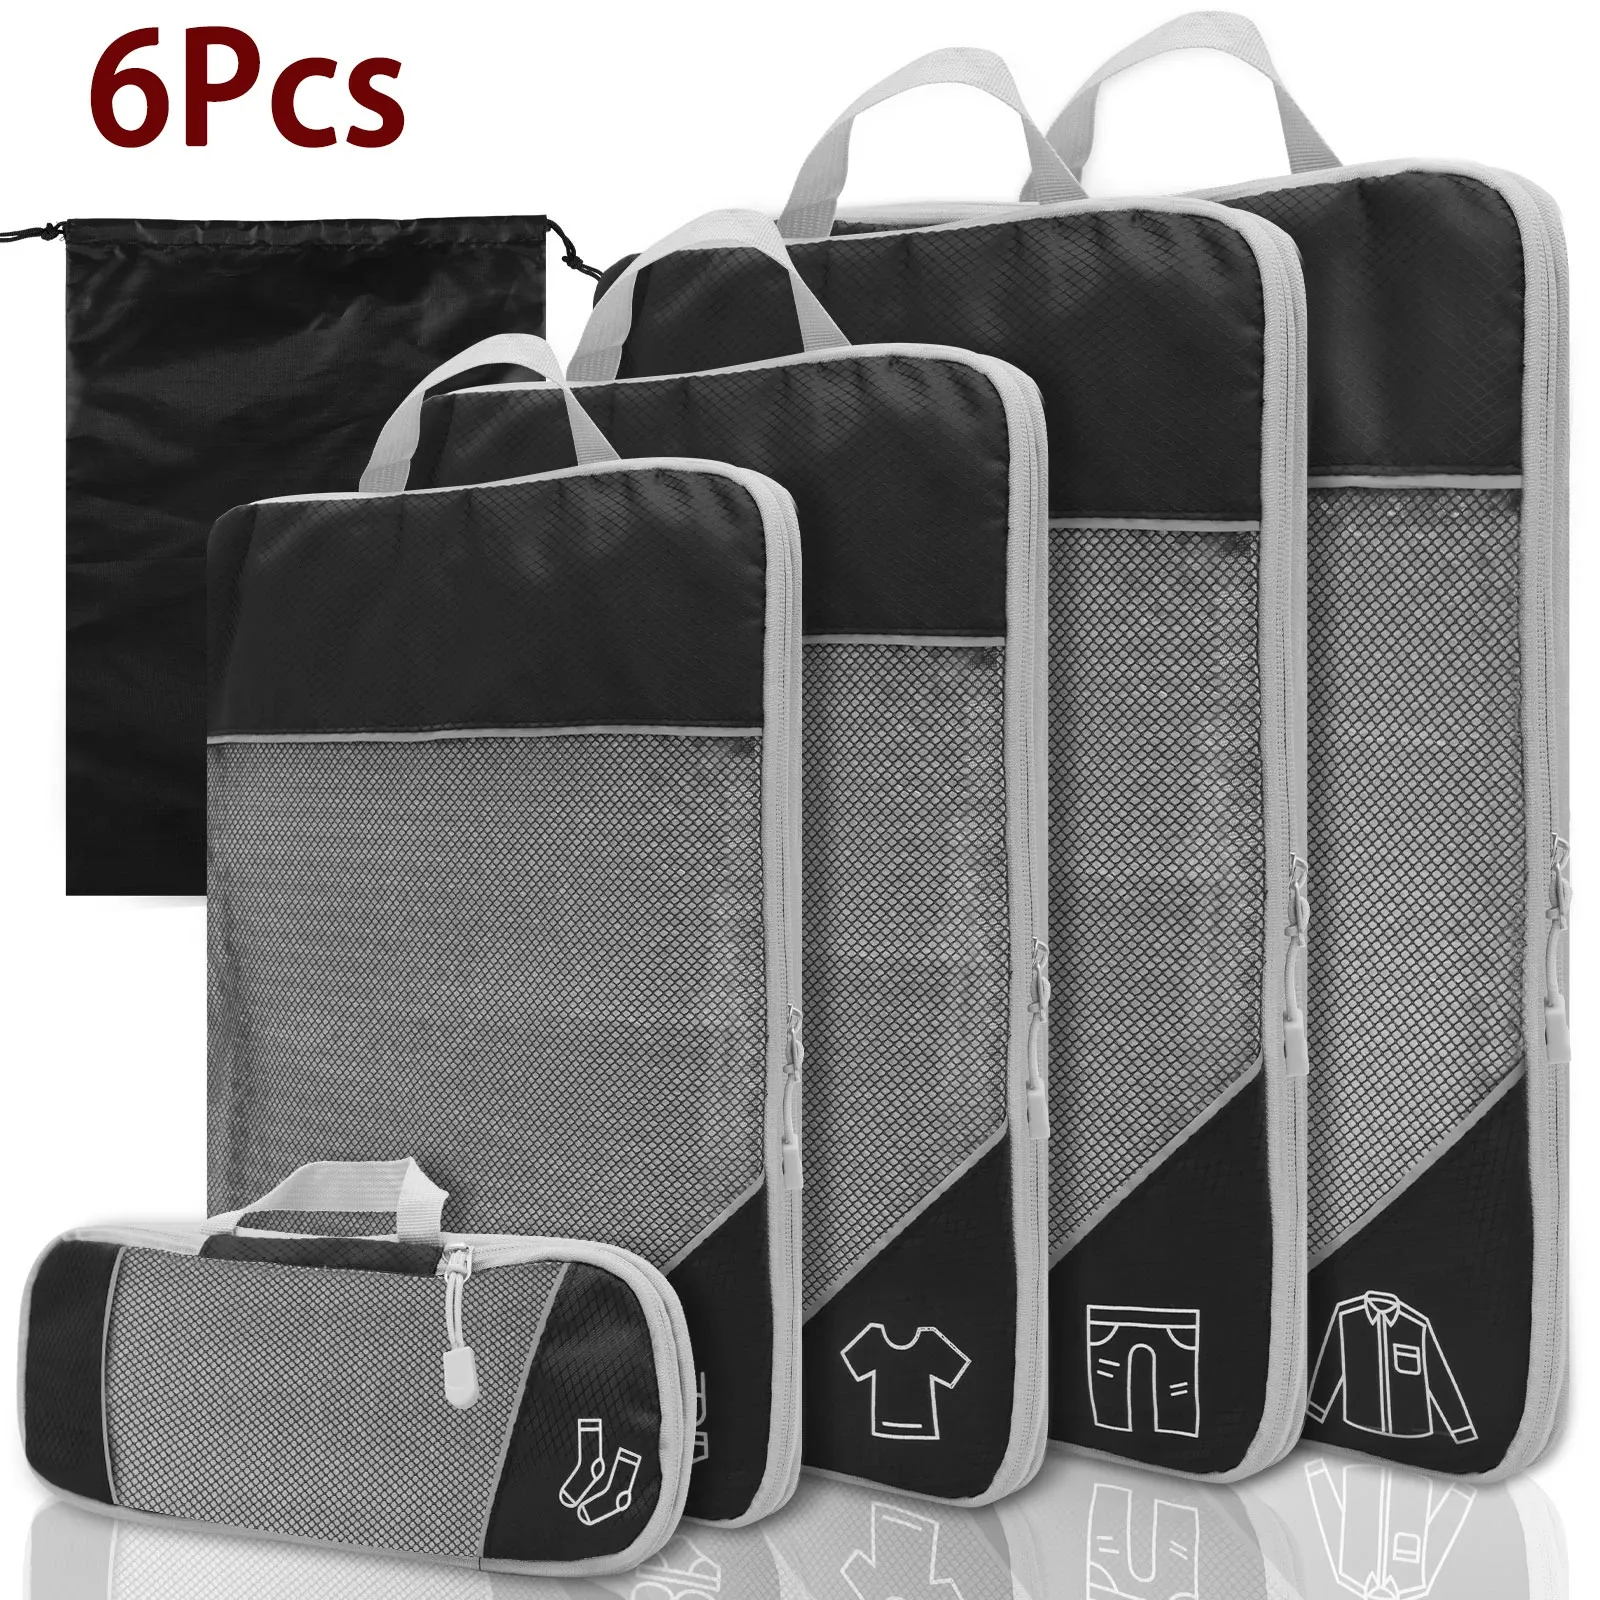 6Pcs Set Travel Bag Compression Packing Cubes Lightweight Durable with Storage Bag Nylon Luggage Suitcase Organizer Bags 240409